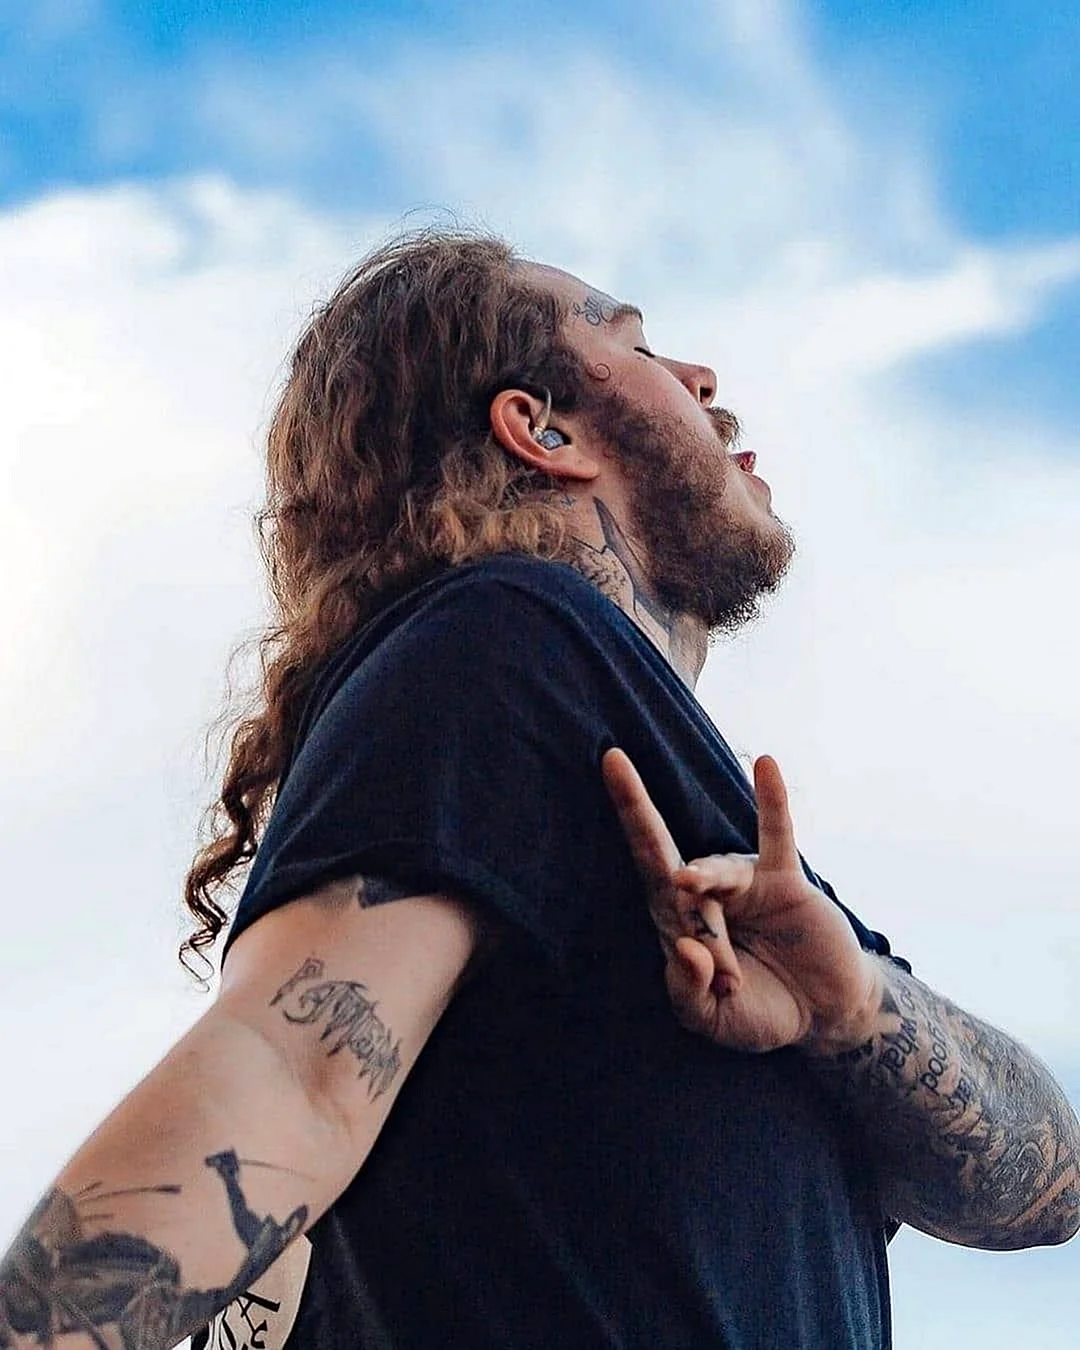 Post Malone Sing Wallpaper For iPhone